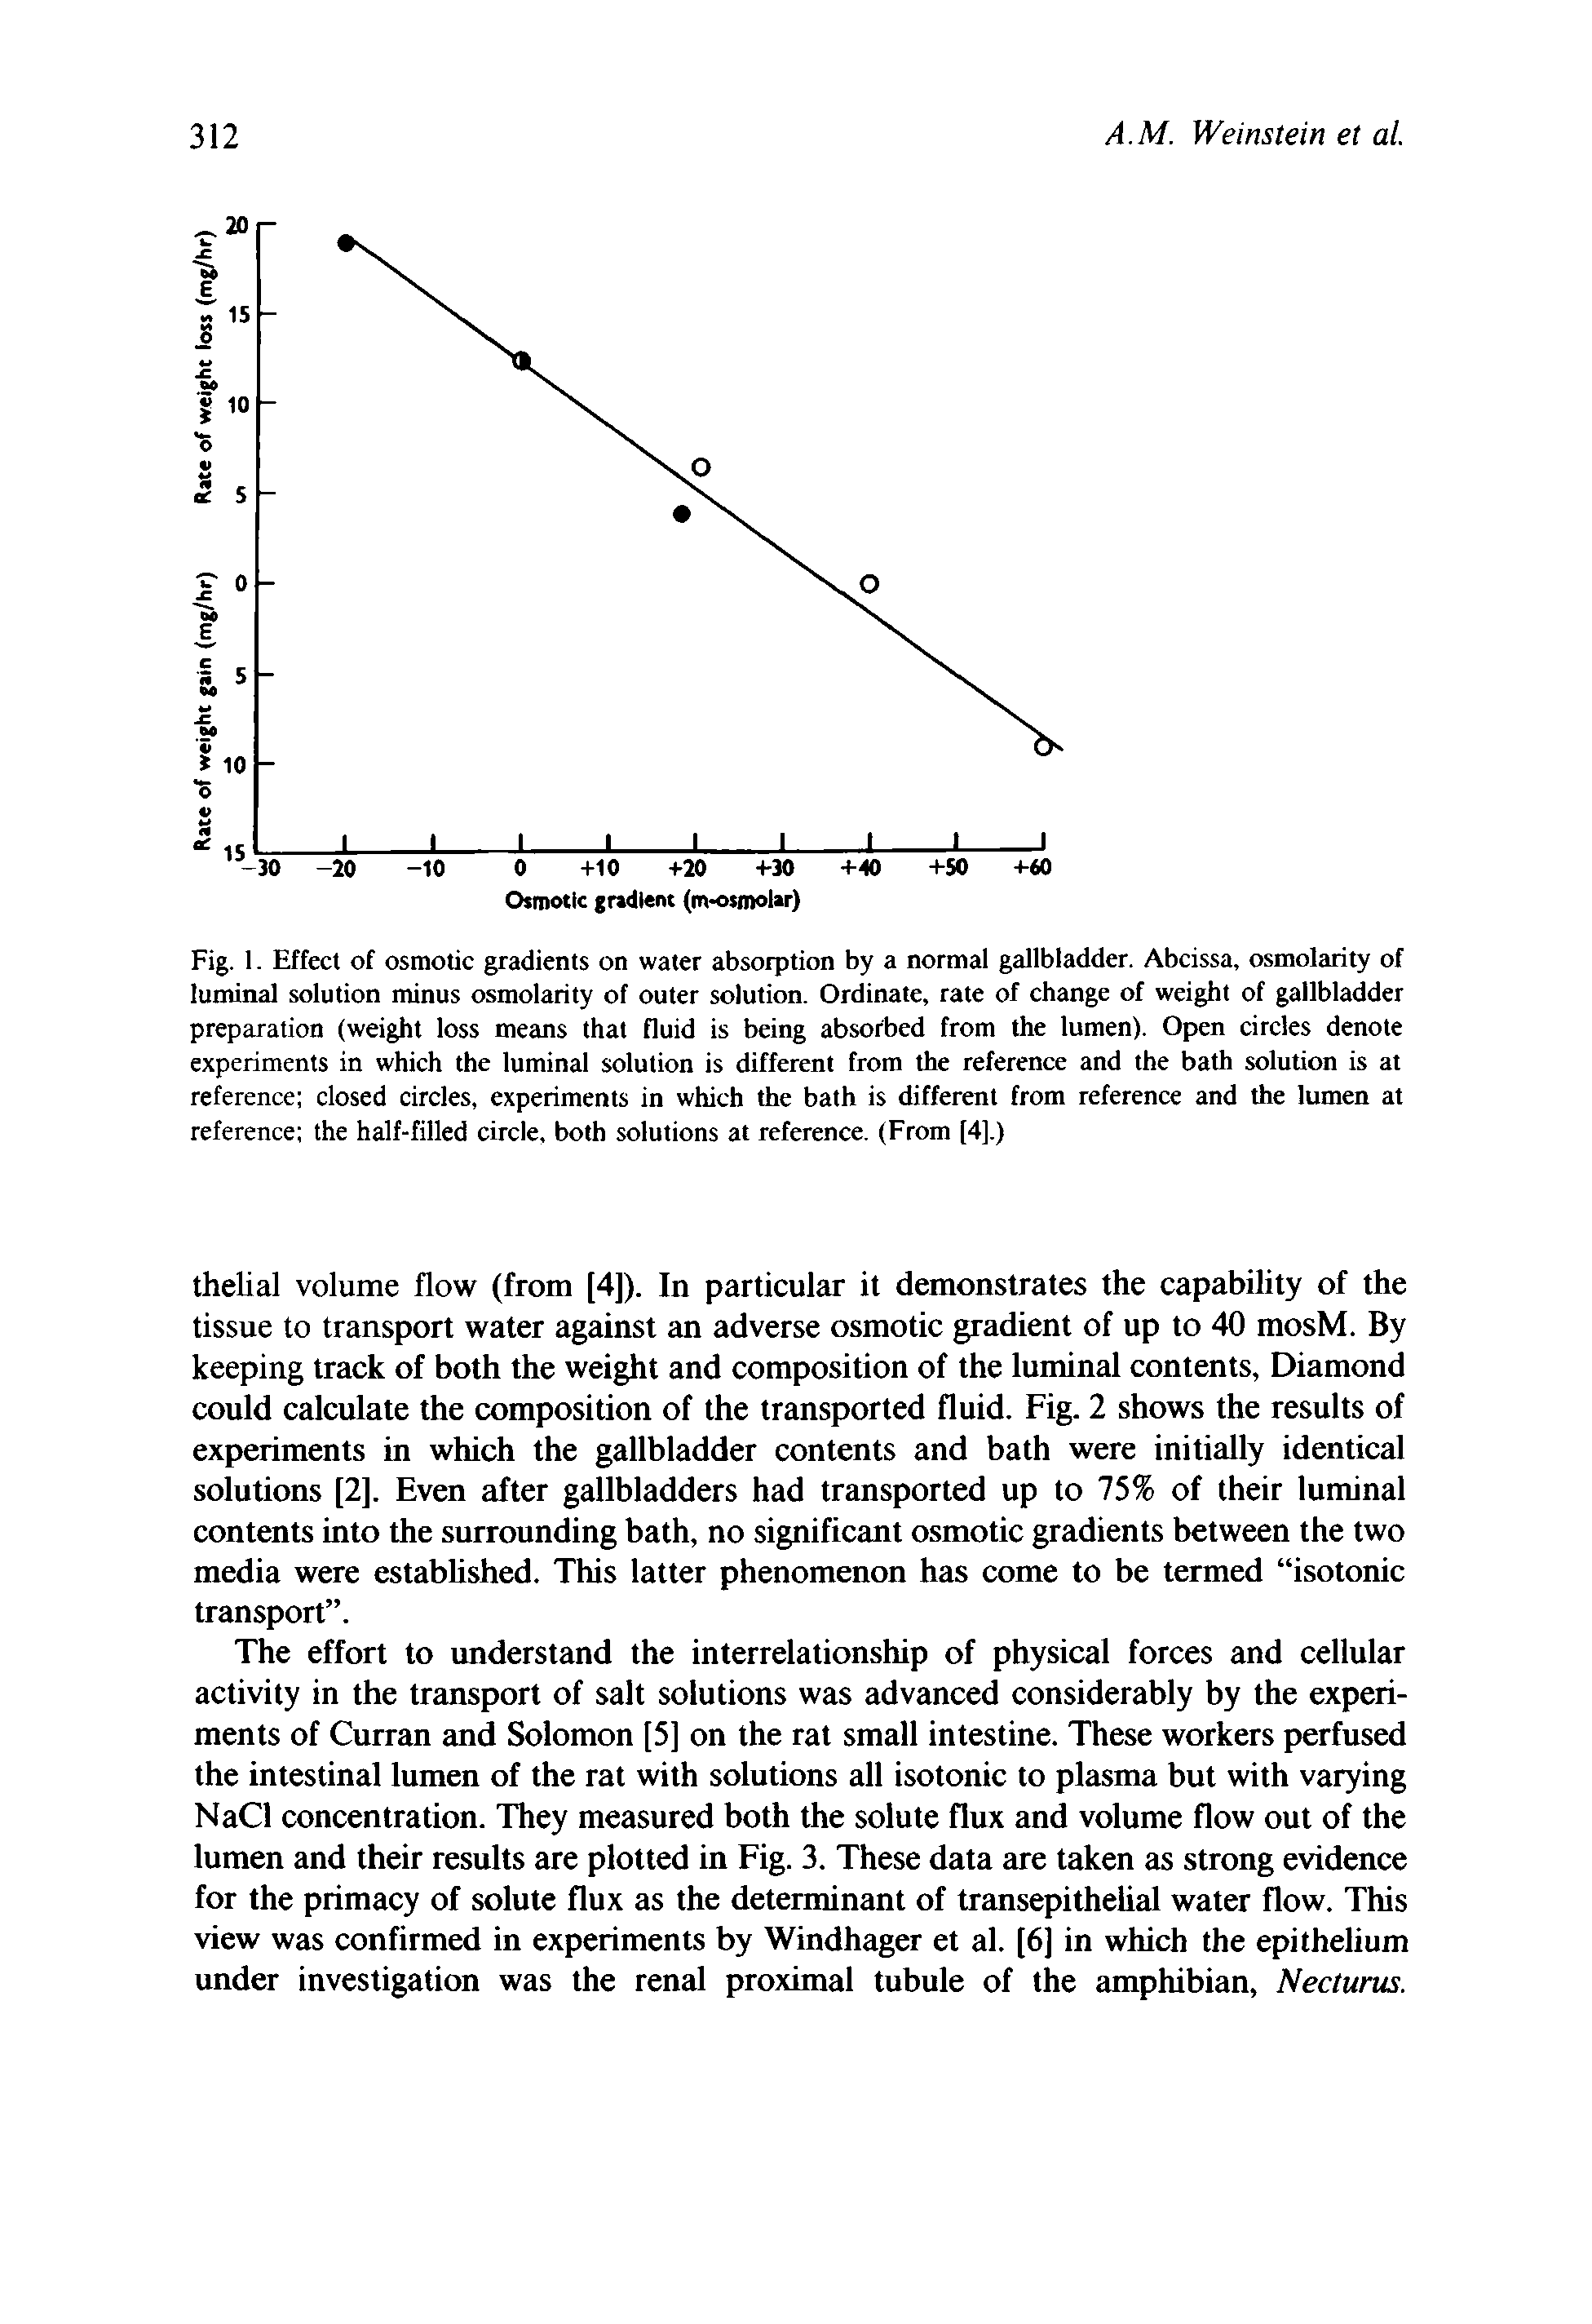 Fig. 1. Effect of osmotic gradients on water absorption by a normal gallbladder. Abcissa, osmolarity of luminal solution minus osmolarity of outer solution. Ordinate, rate of change of weight of gallbladder preparation (weight loss means that fluid is being absorbed from the lumen). Open circles denote experiments in which the luminal solution is different from the reference and the bath solution is at reference closed circles, experiments in which the bath is different from reference and the lumen at reference the half-filled circle, both solutions at reference. (From [4].)...